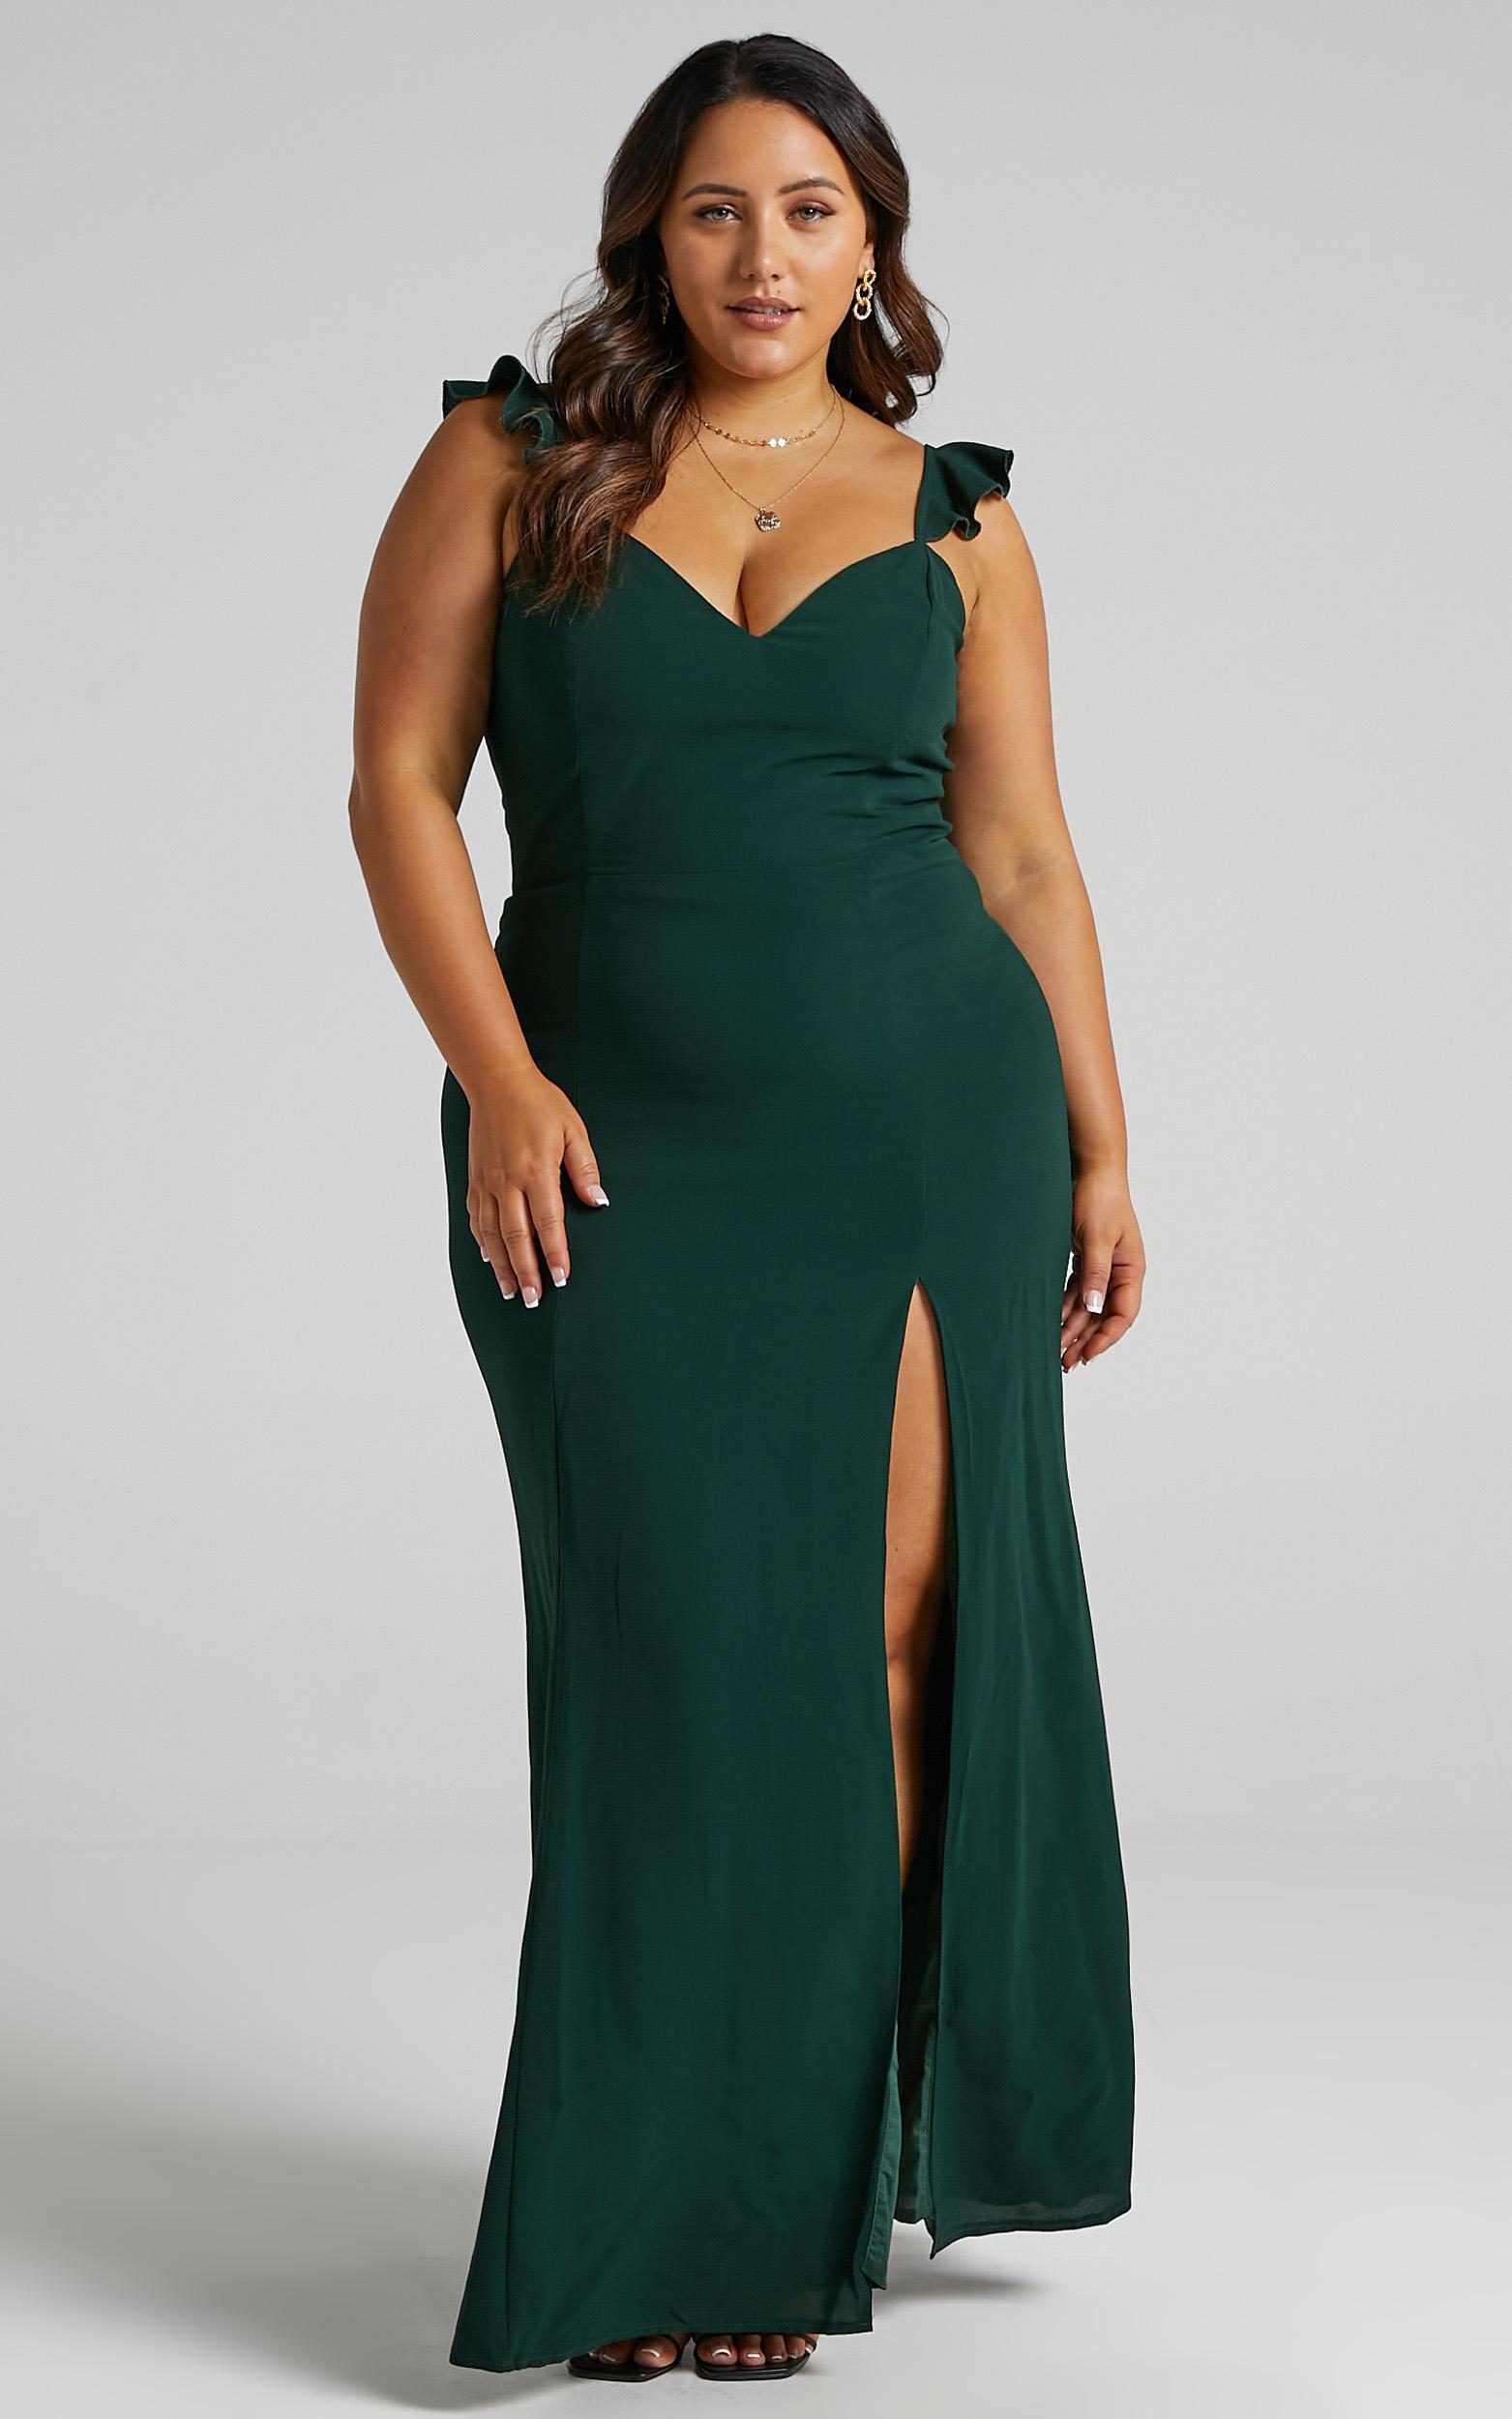 More Than This Ruffle Strap Maxi Dress in Emerald - 08, GRN2, hi-res image number null